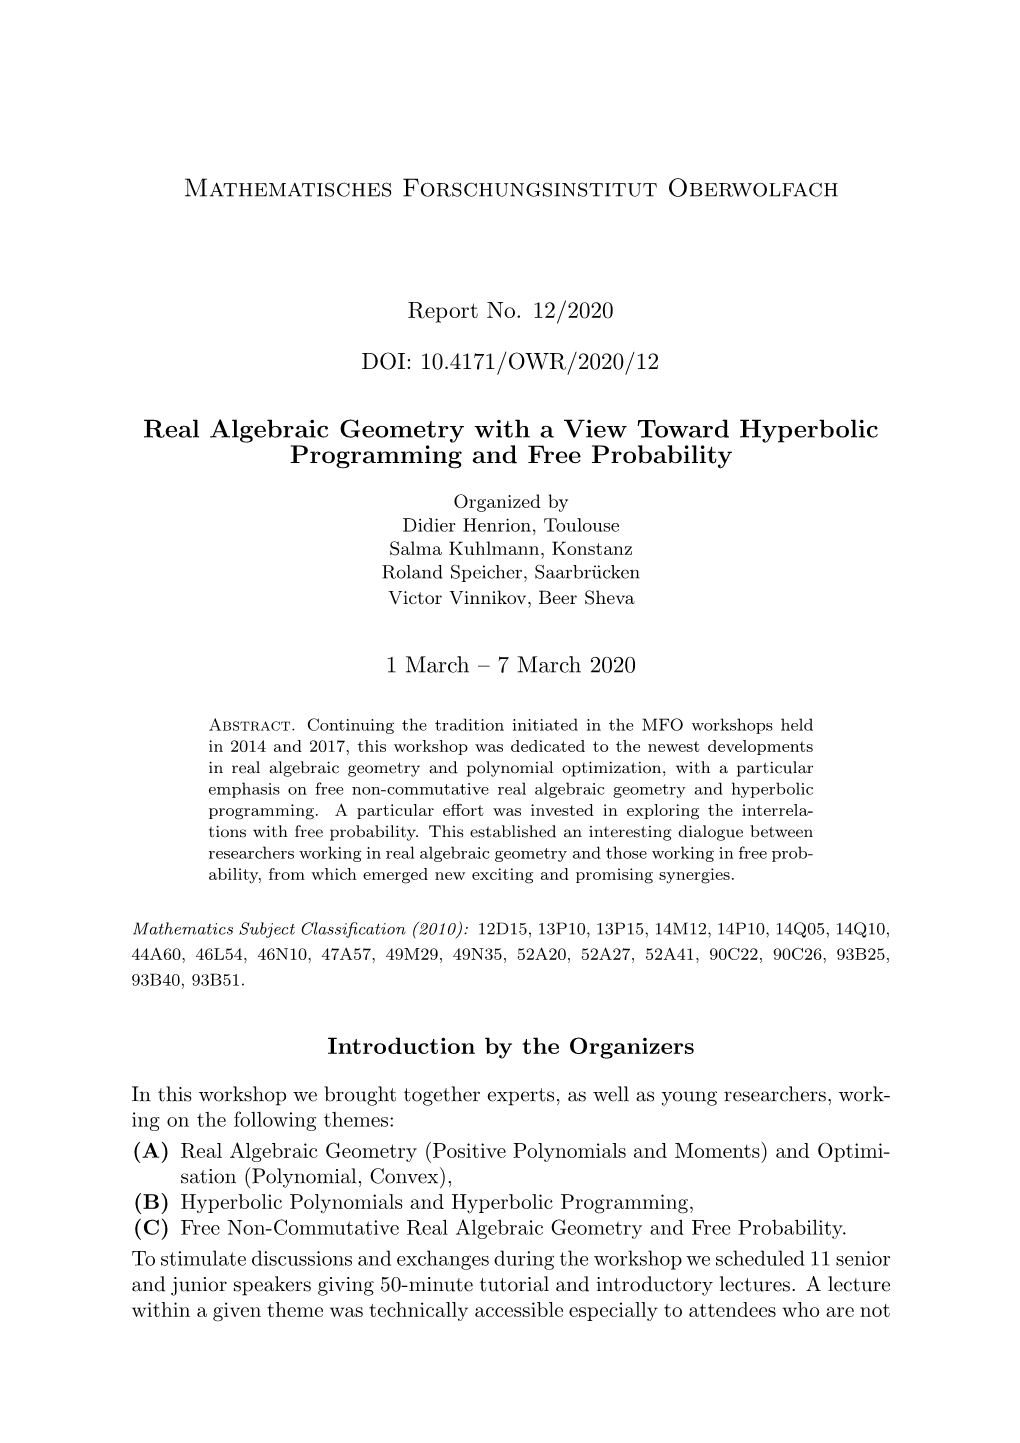 Real Algebraic Geometry with a View Toward Hyperbolic Programming and Free Probability